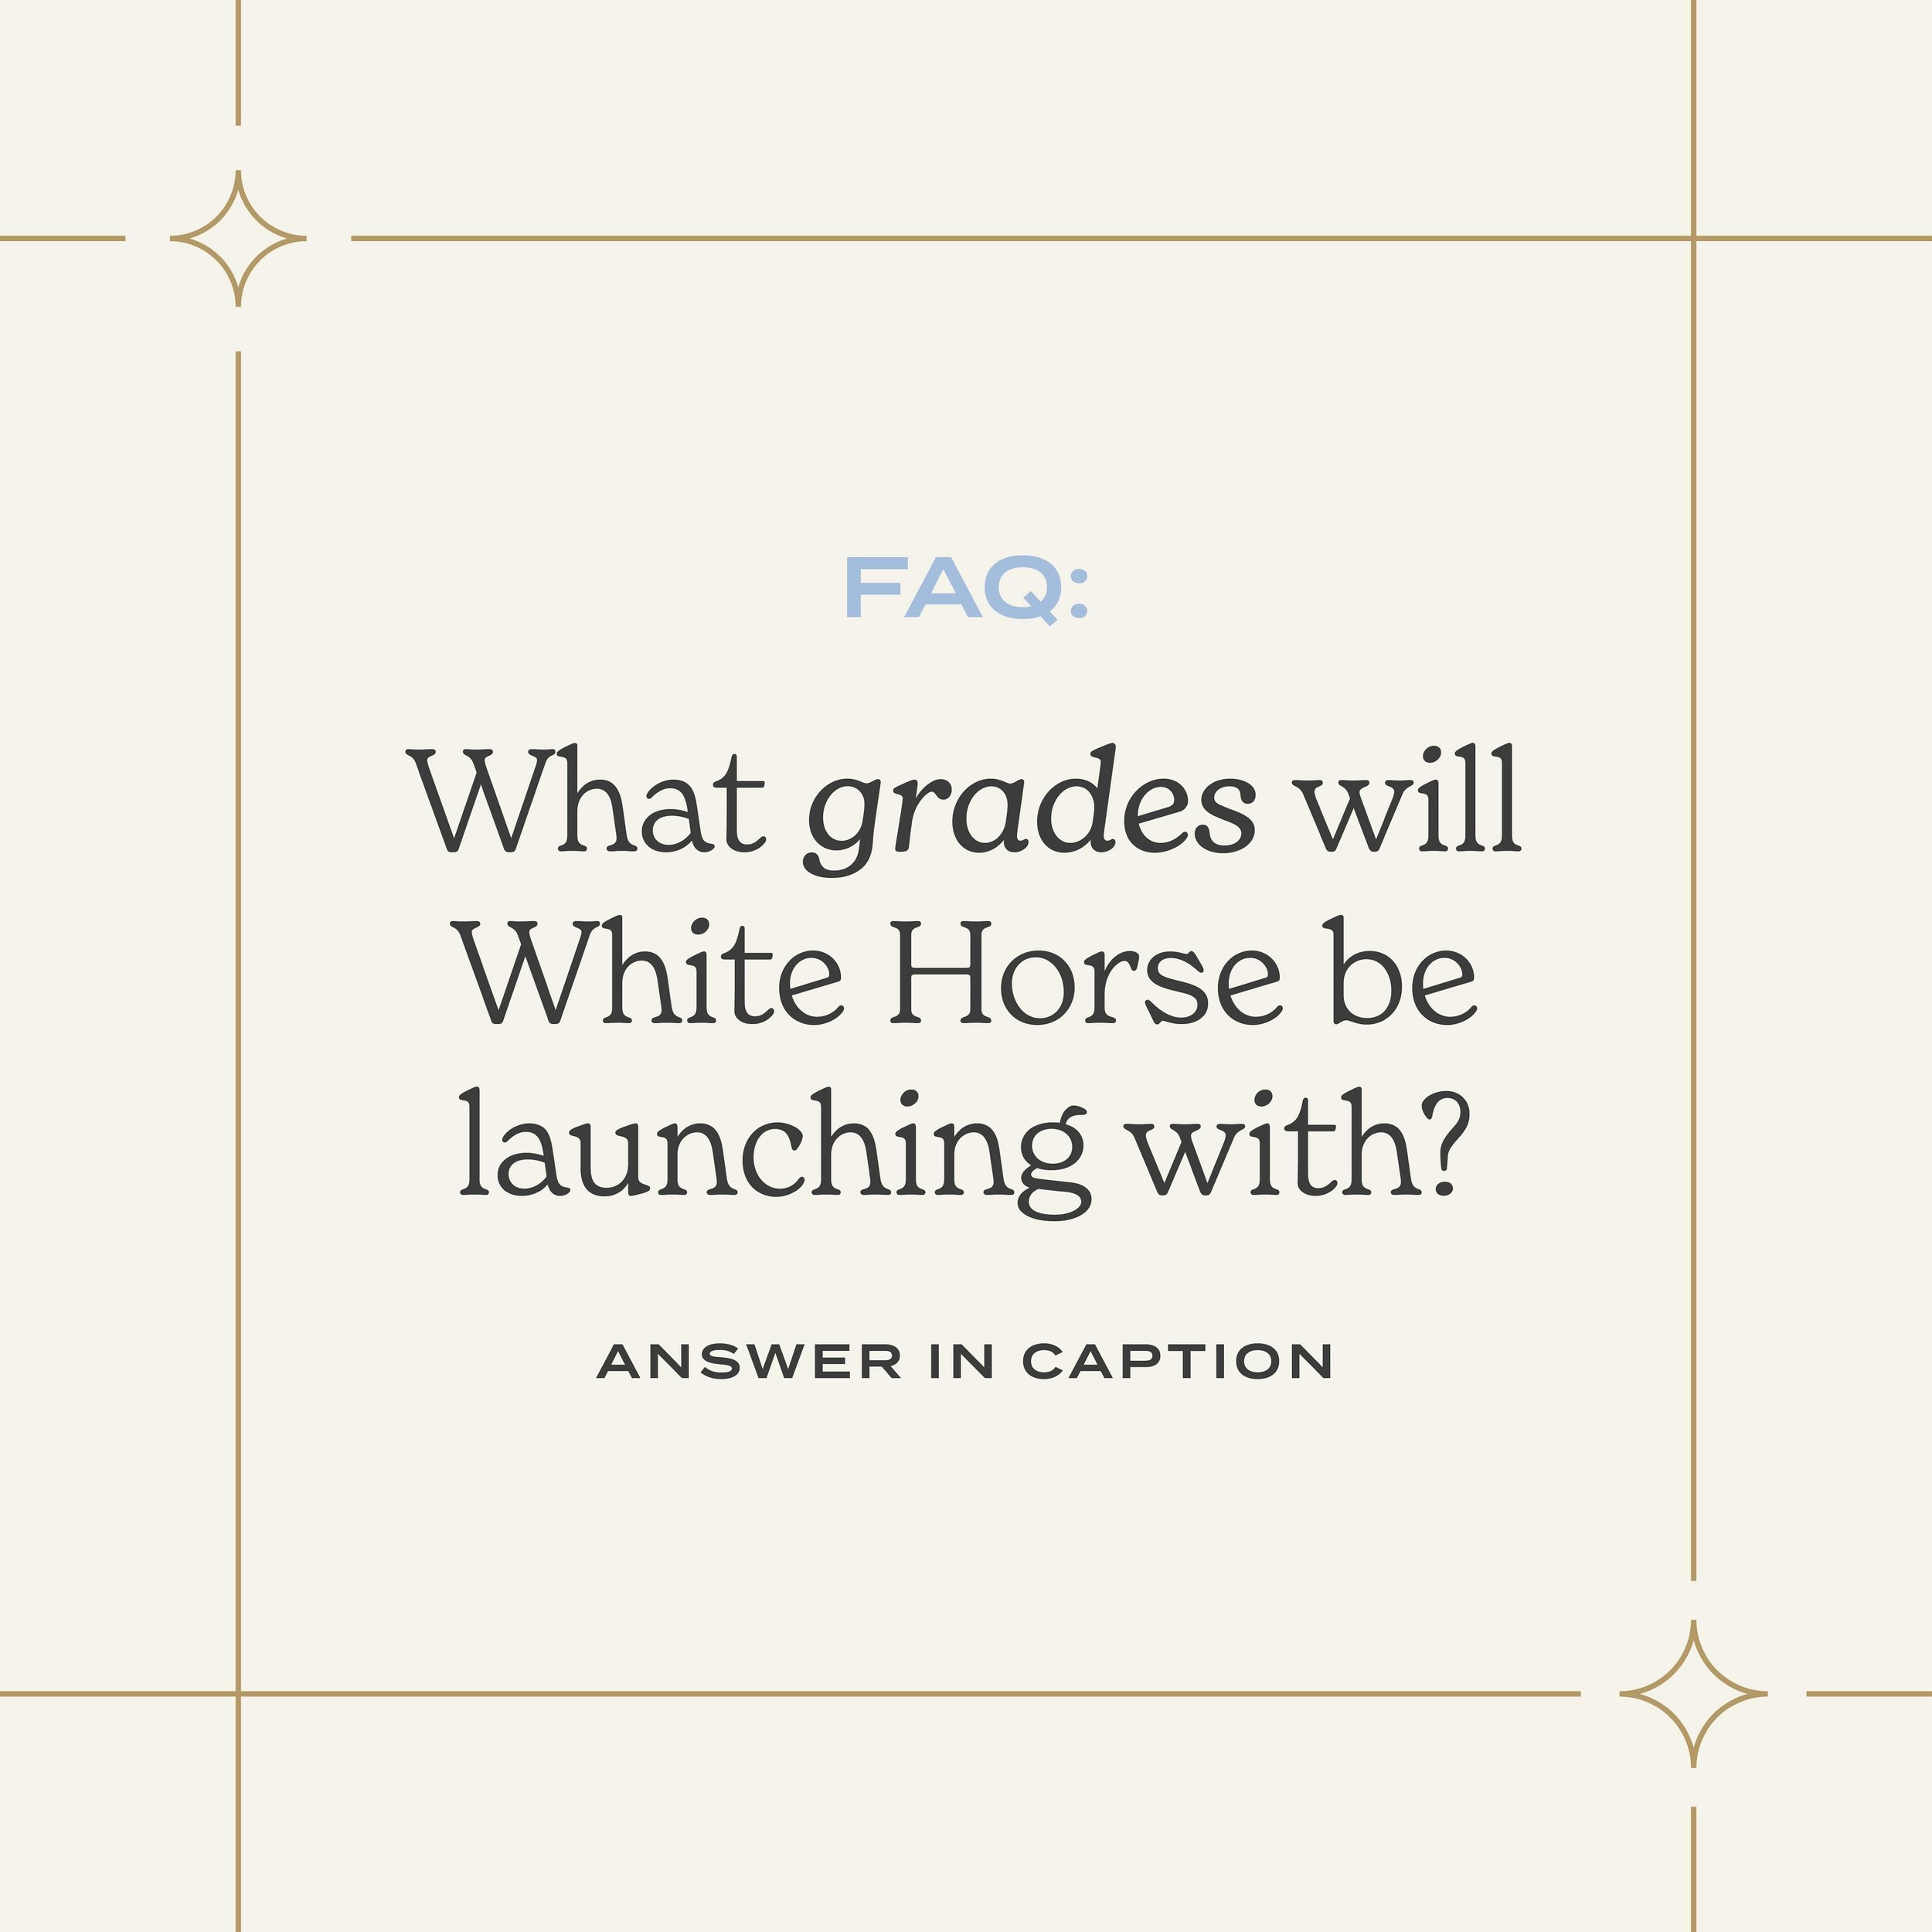 We plan to open the school with grades K-3 in August 2024. Eventually, White Horse Academy will grow into a full K-12 school.